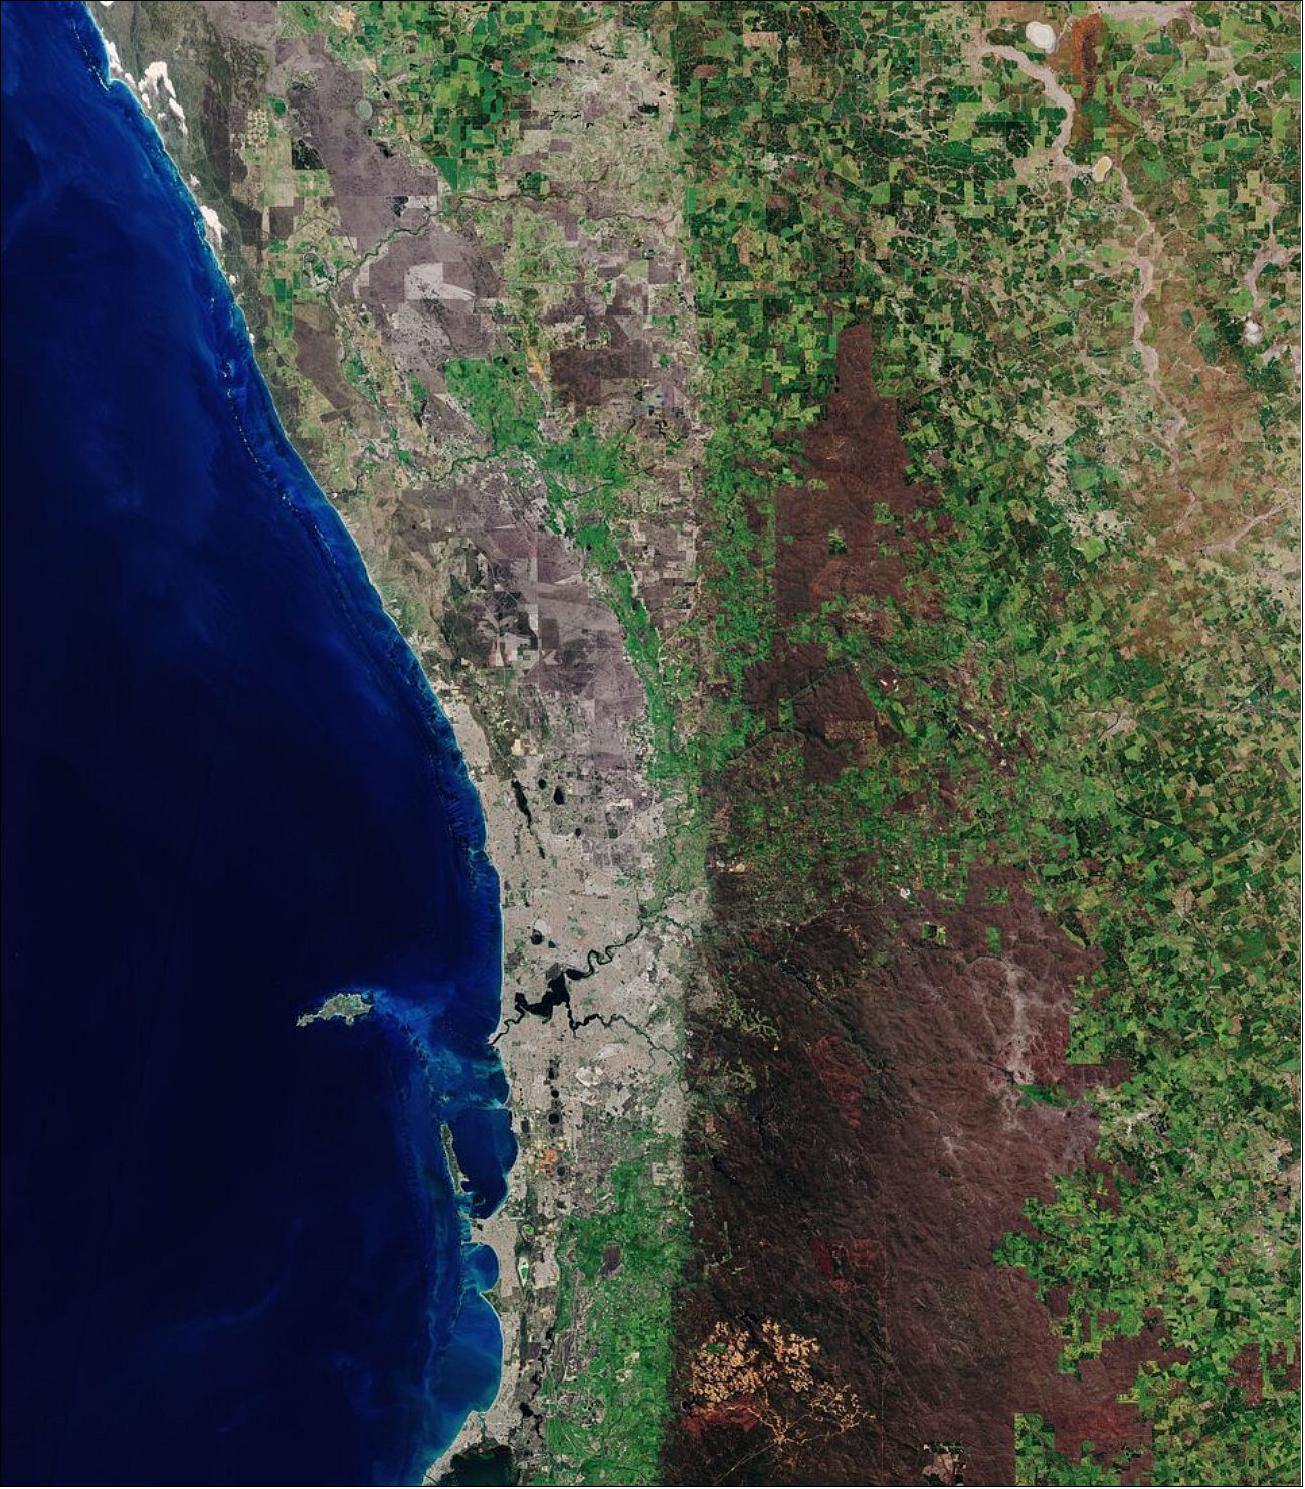 Figure 12: Perth, Western Australia’s capital and largest city, is featured in this true-color image captured by the Copernicus Sentinel-2 mission. This image is also featured on the Earth from Space video program (image credit: ESA)